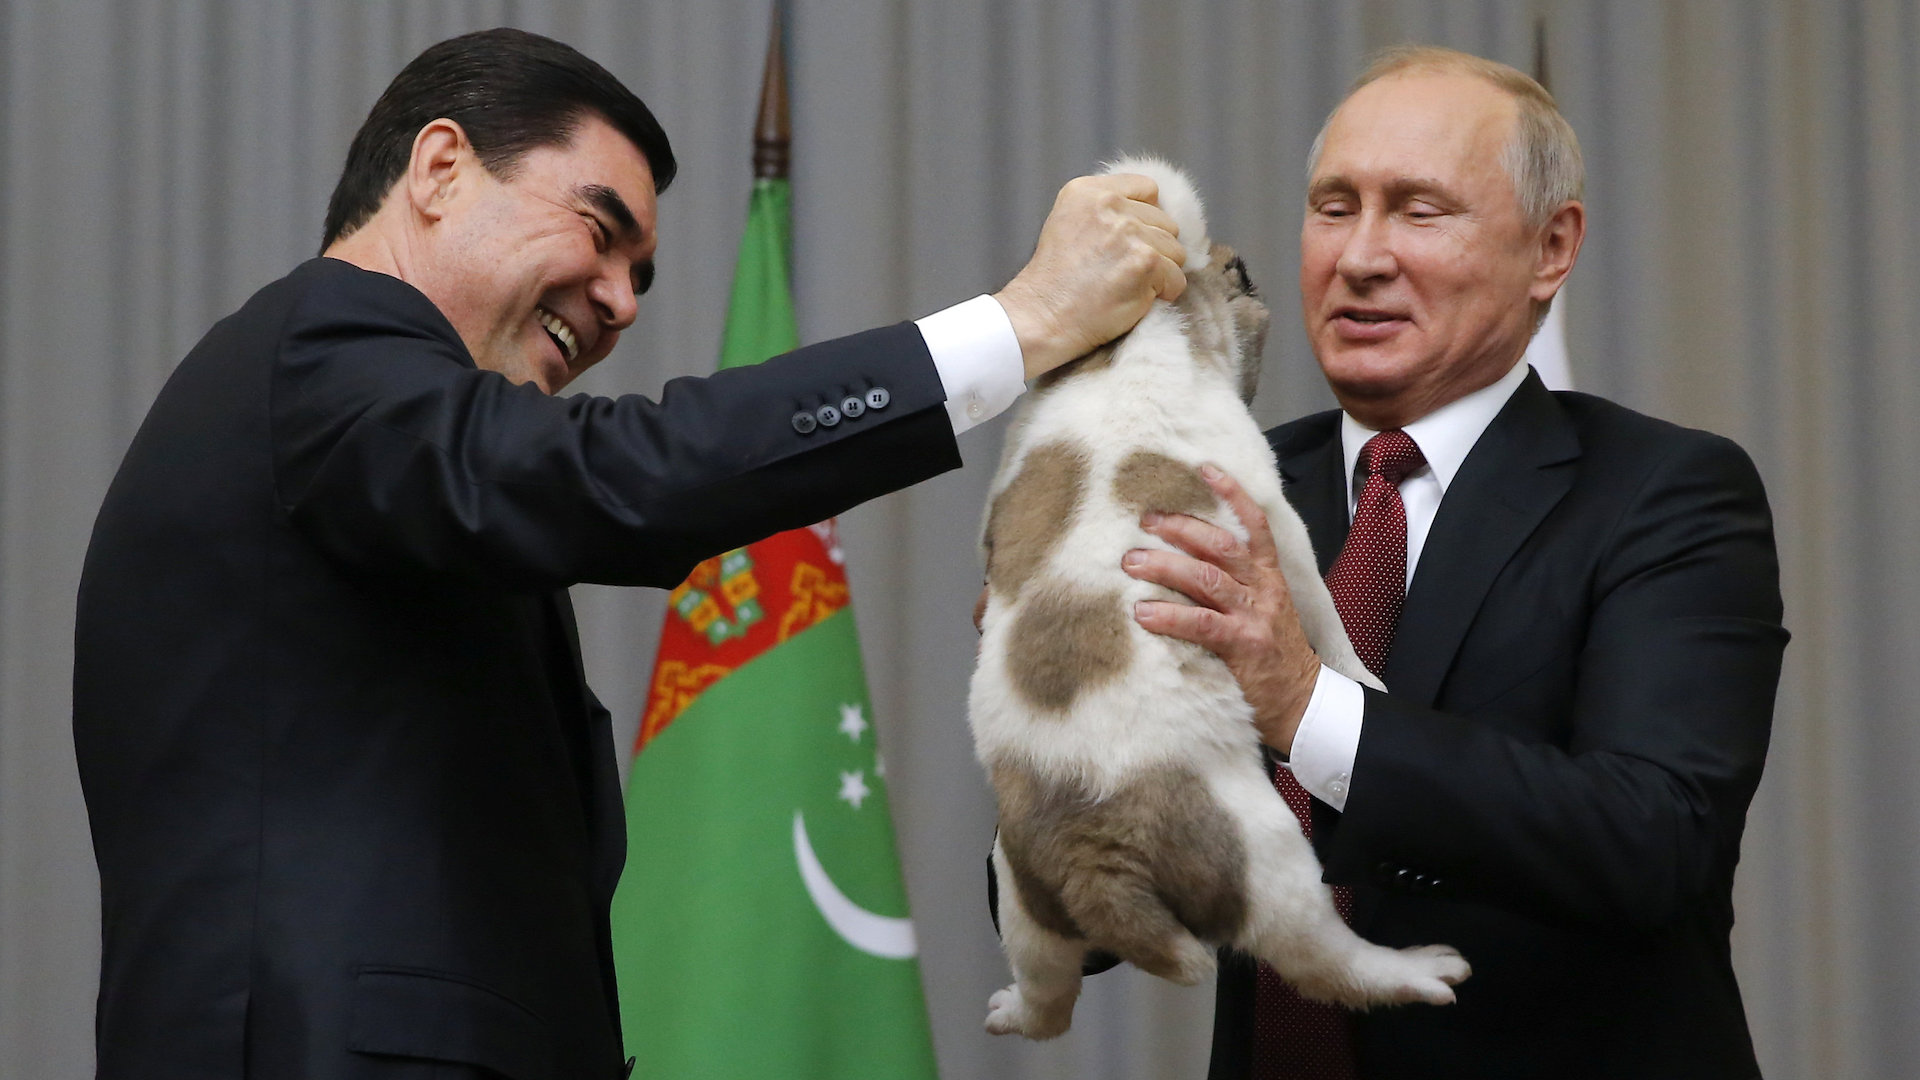 What S With World Leaders Giving Vladimir Putin Puppies As Gifts The Washington Post